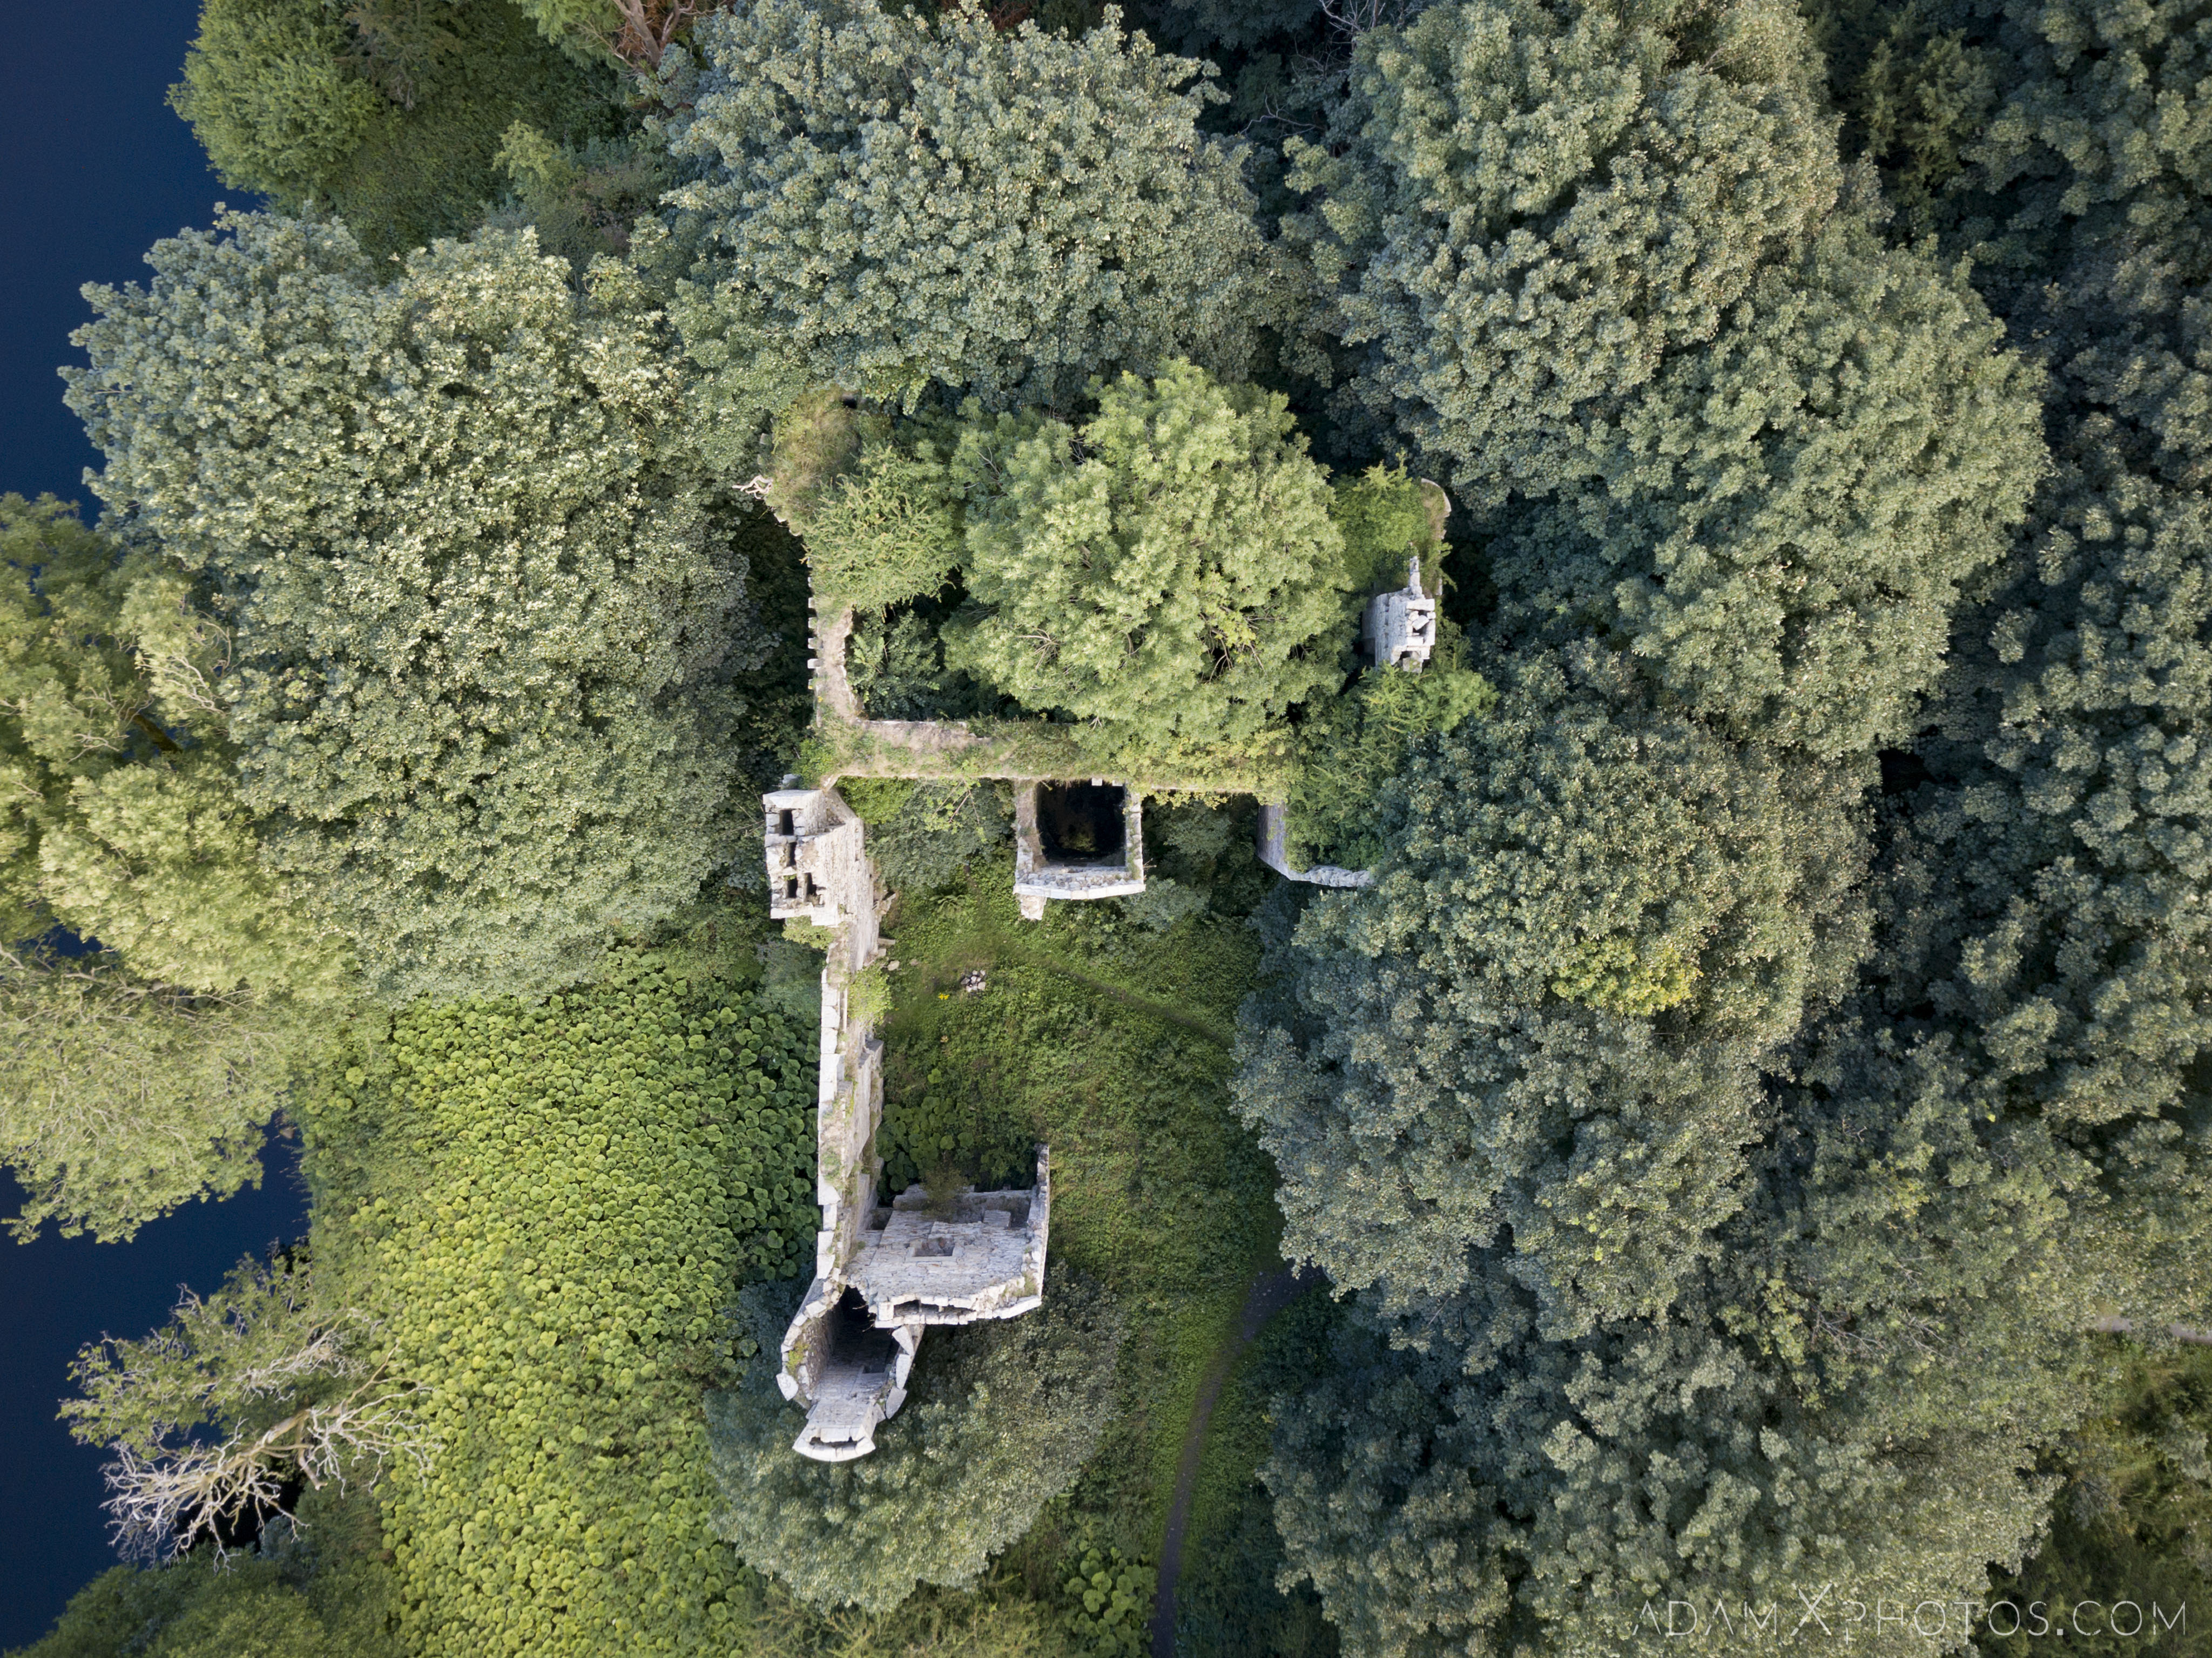 Drone Mavic from above aerial view overgrown Old Dalquharran Castle Ayrshire Scotland Adam X Urbex Urban Exploration Access 2018 Abandoned decay ruins lost forgotten derelict location creepy haunting eerie